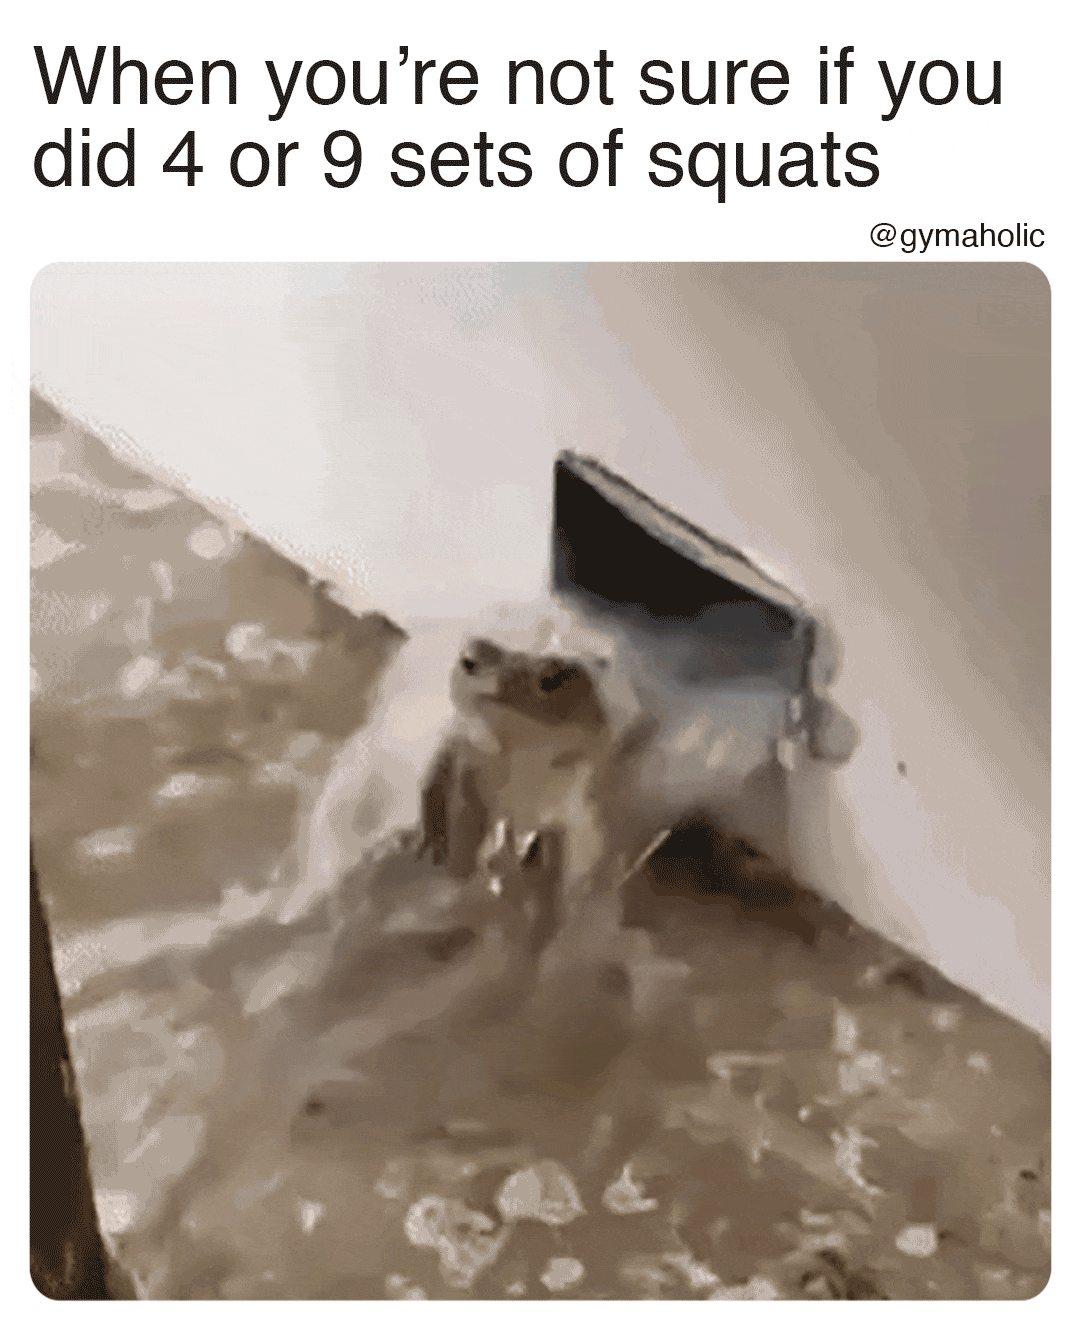 When you’re not sure if you did 4 or 9 sets of squats